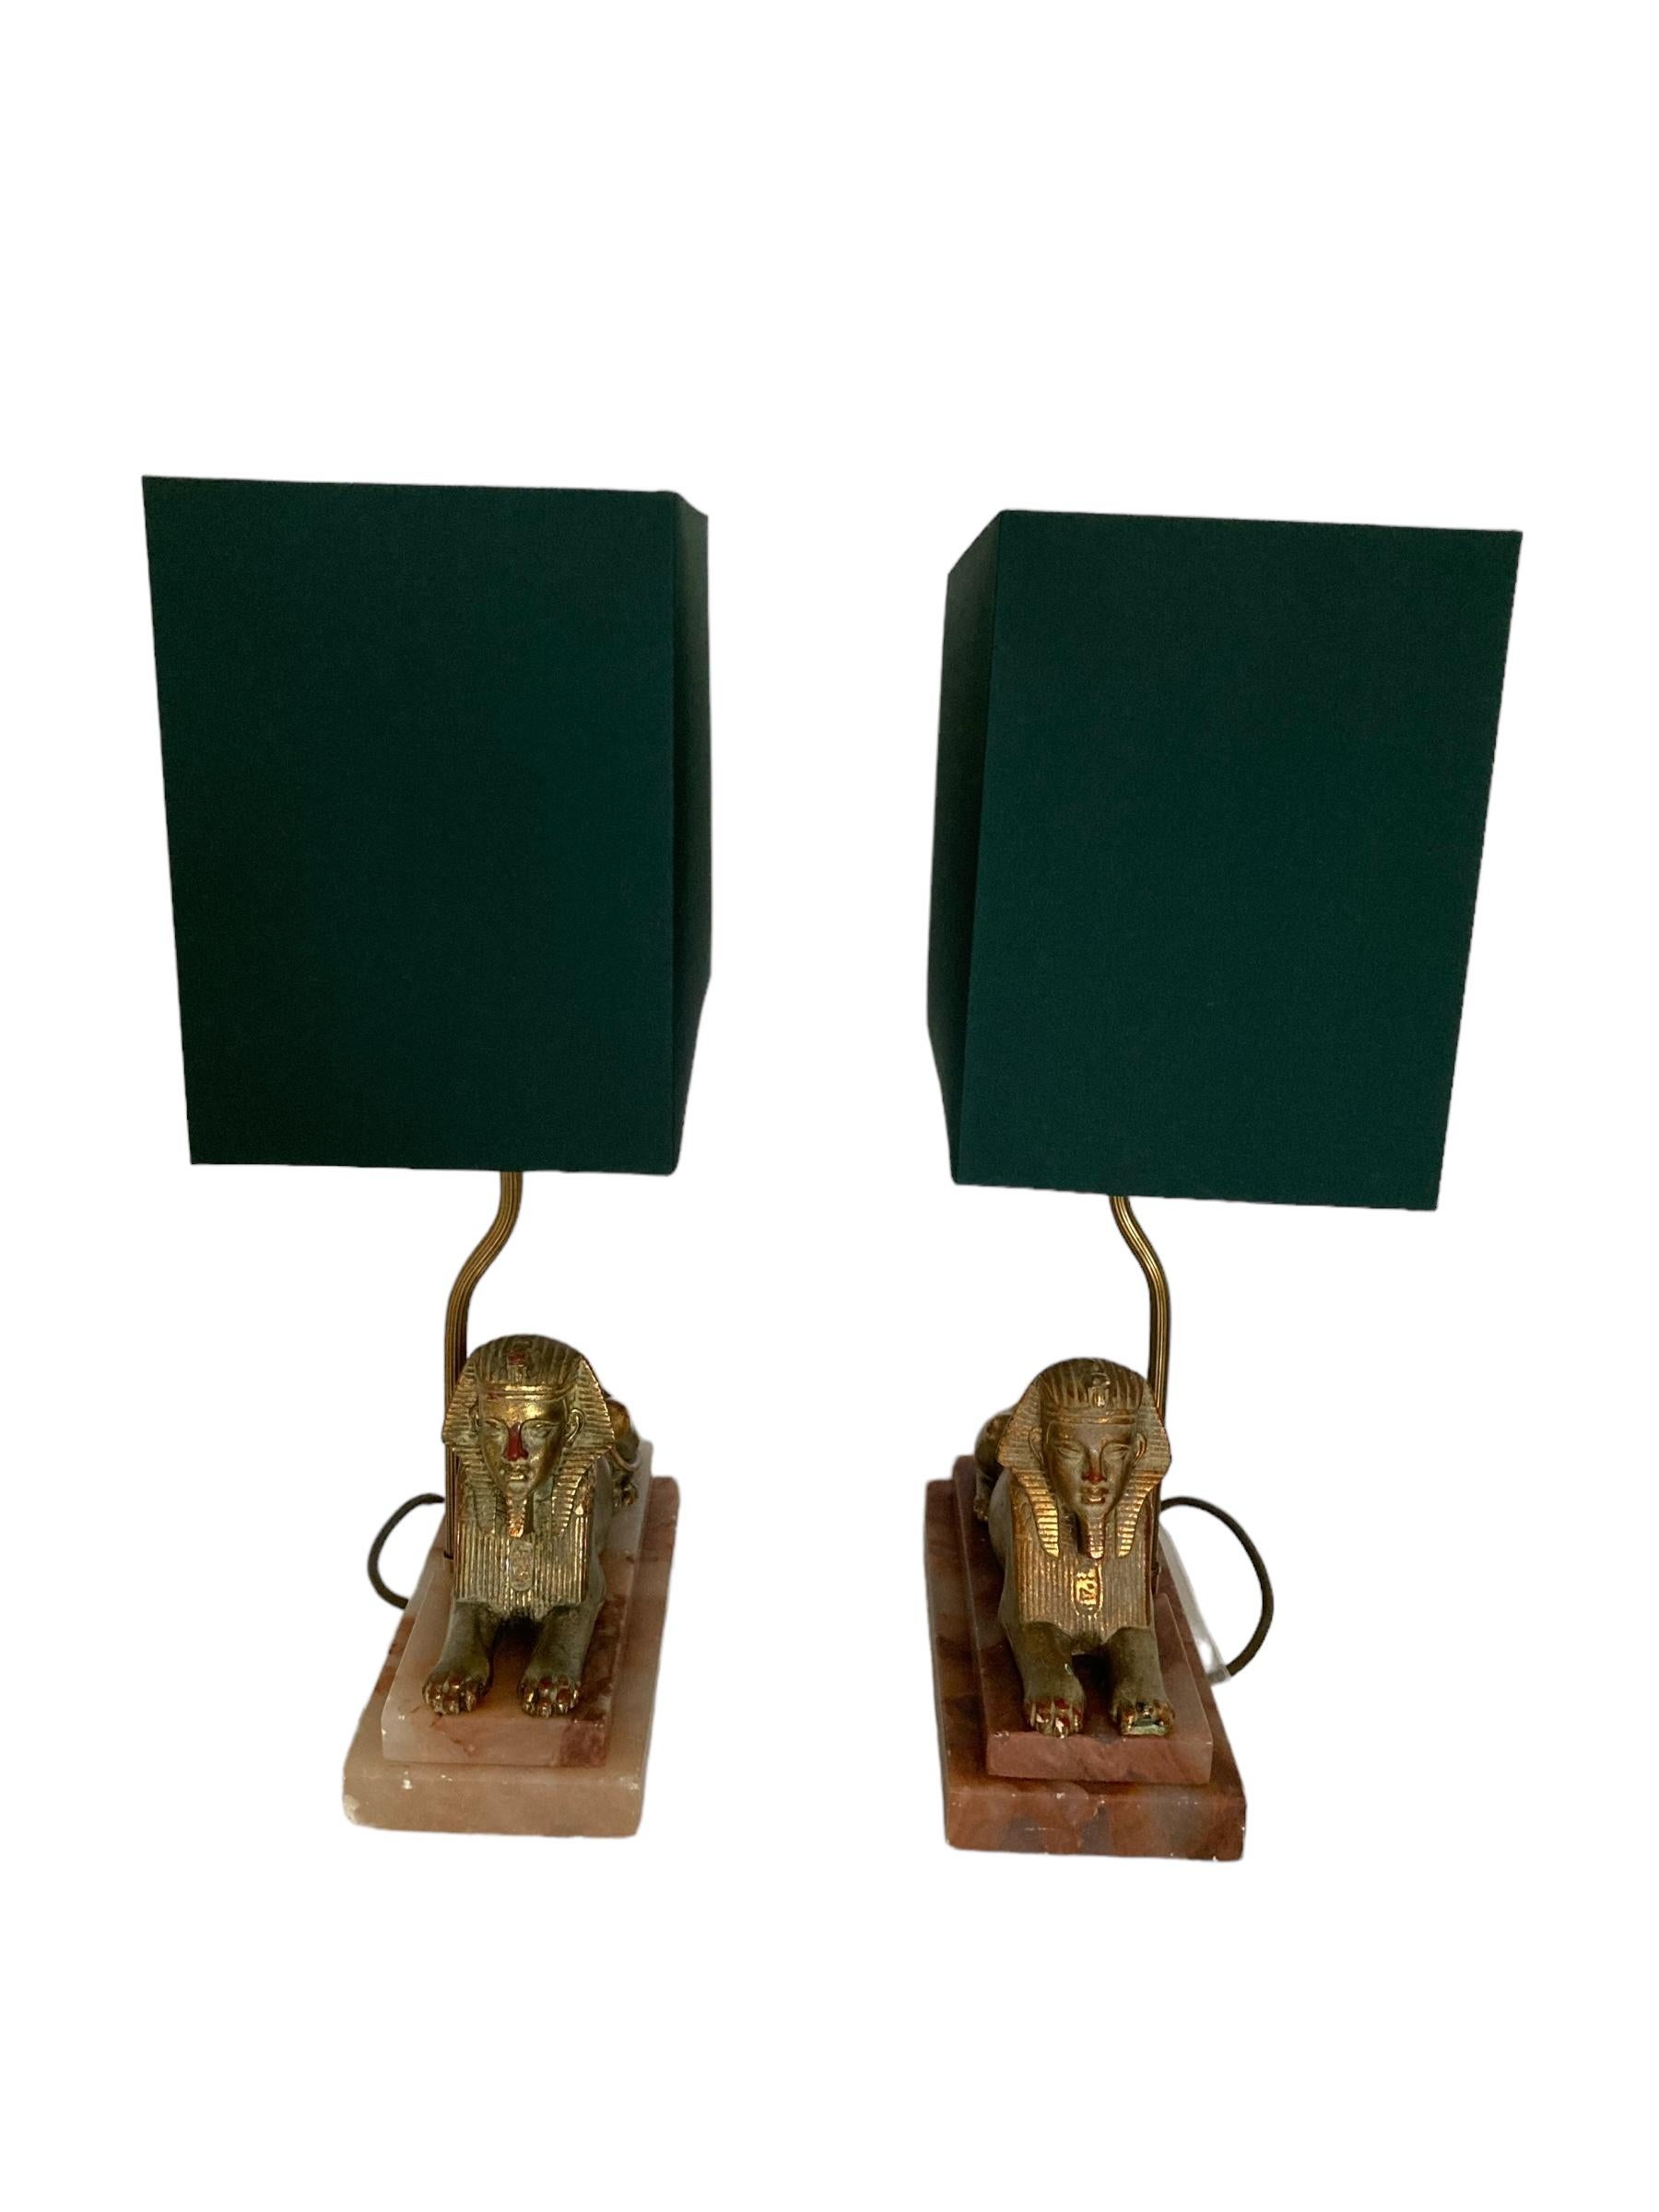 French A Pair of Art Deco Egytian Sphinx Table Lamps on a Marble Base Dark Green Shades For Sale